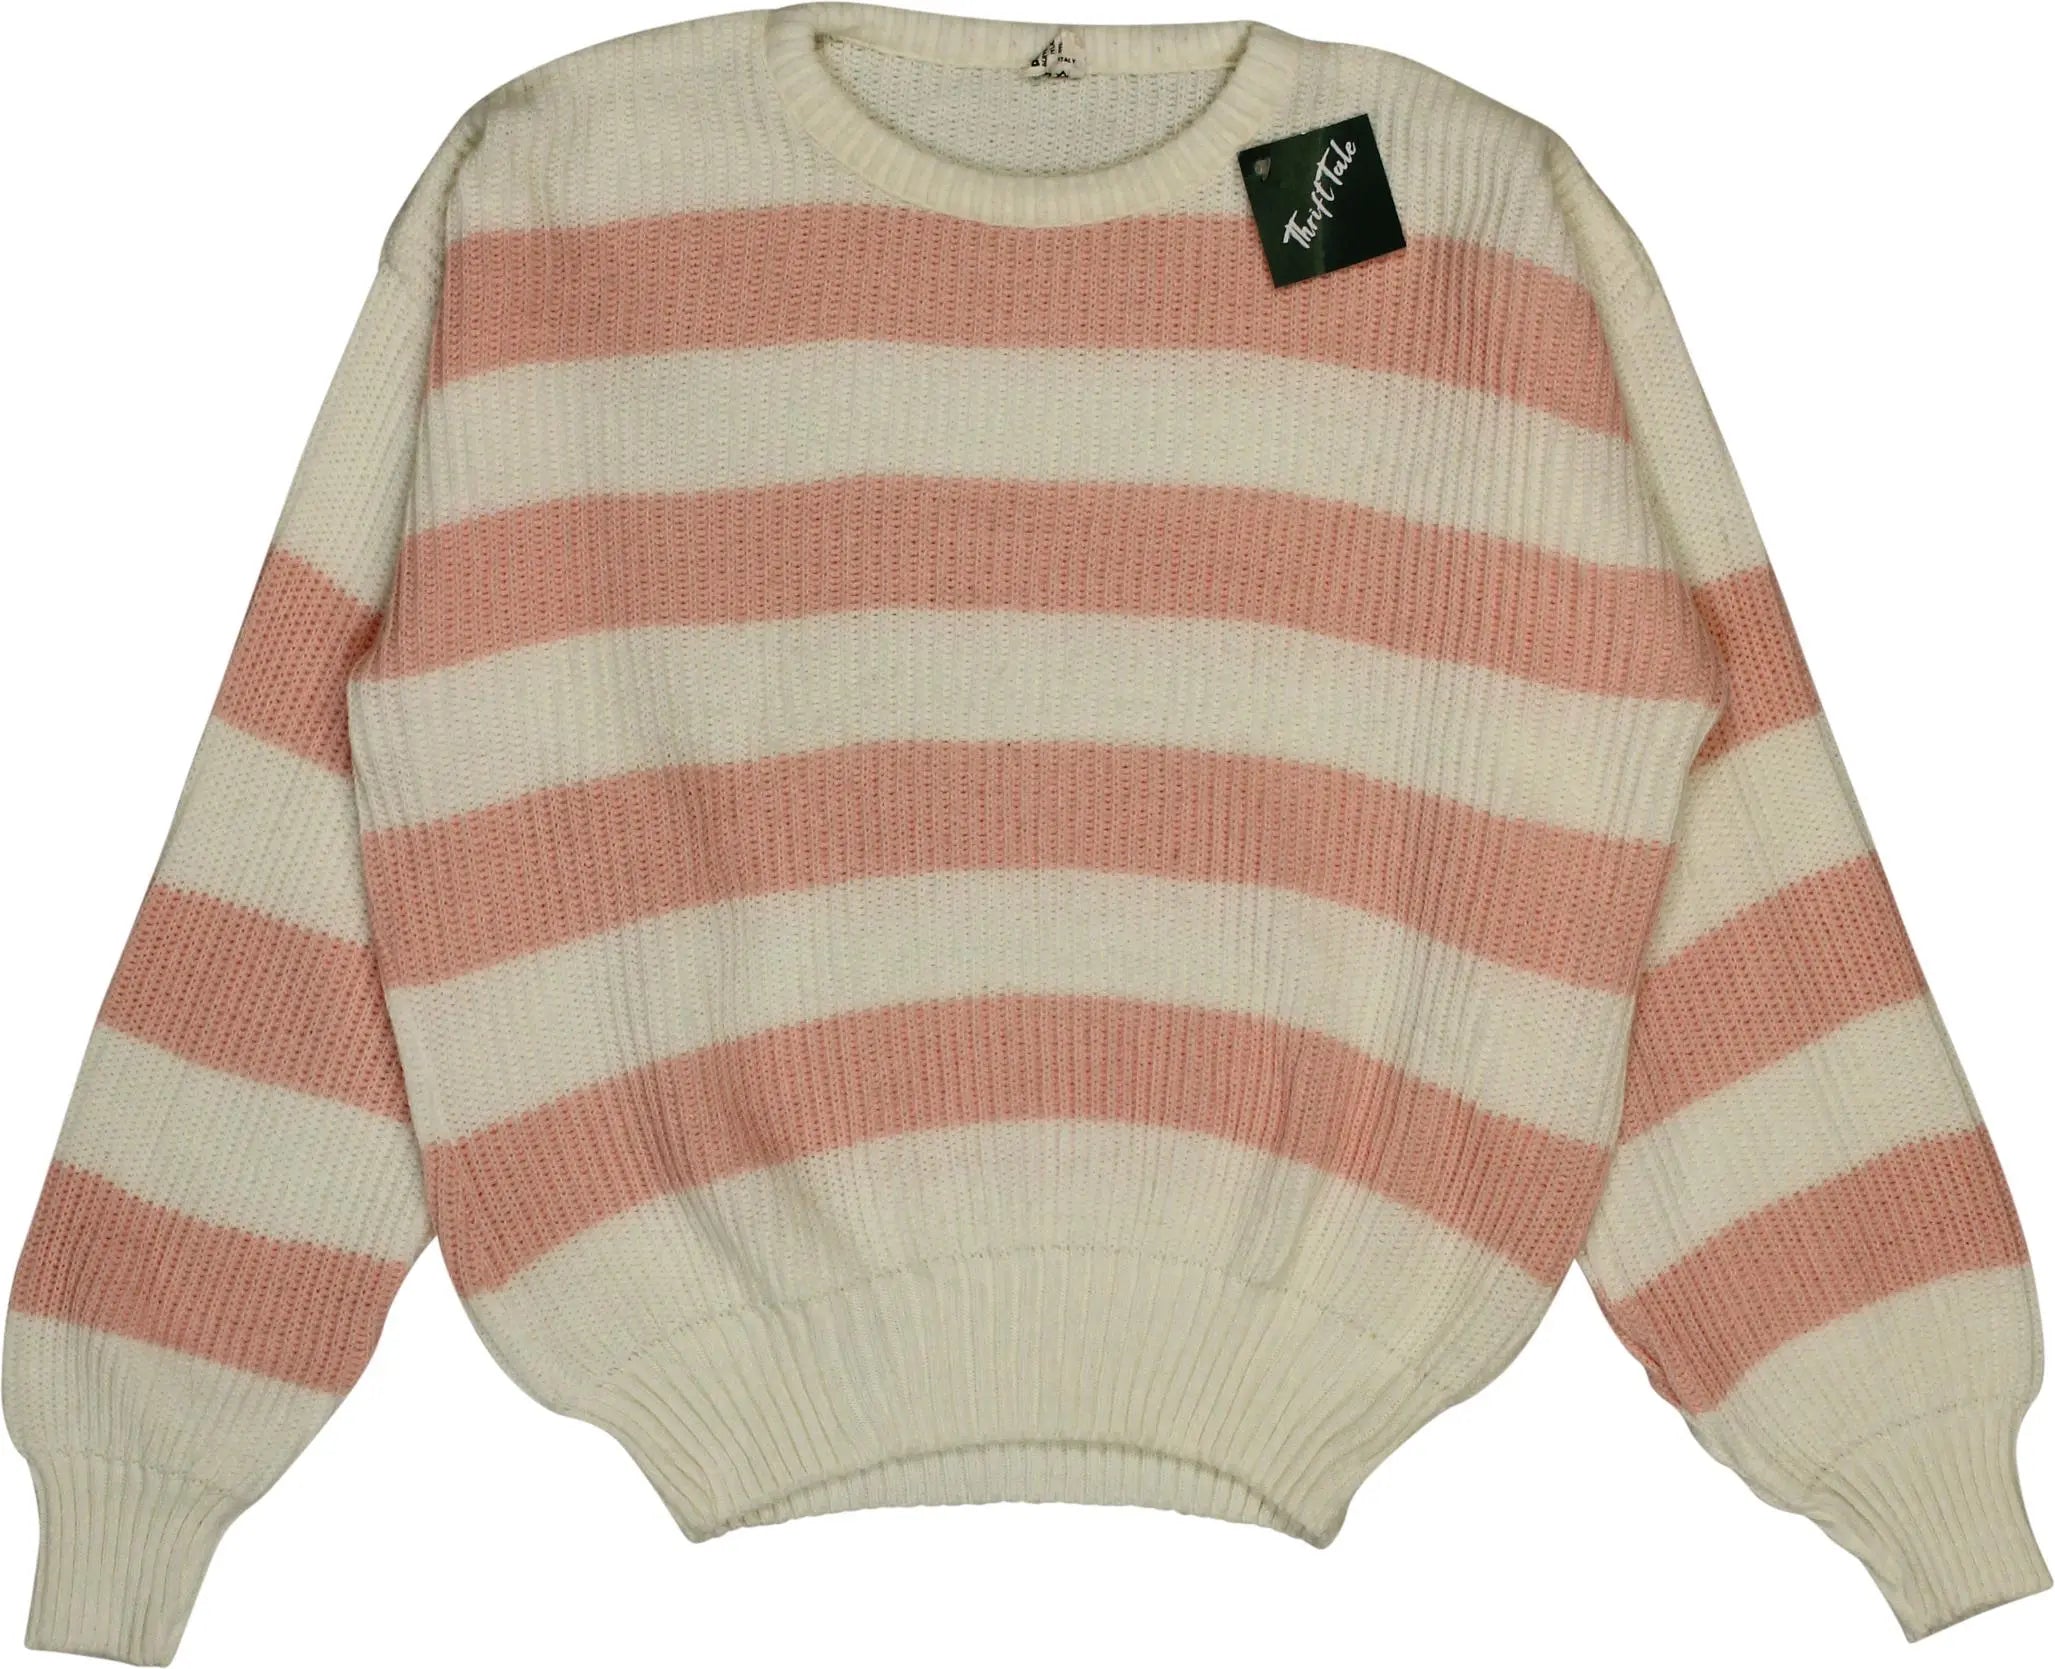 Unknown - 80s Striped Jumper- ThriftTale.com - Vintage and second handclothing